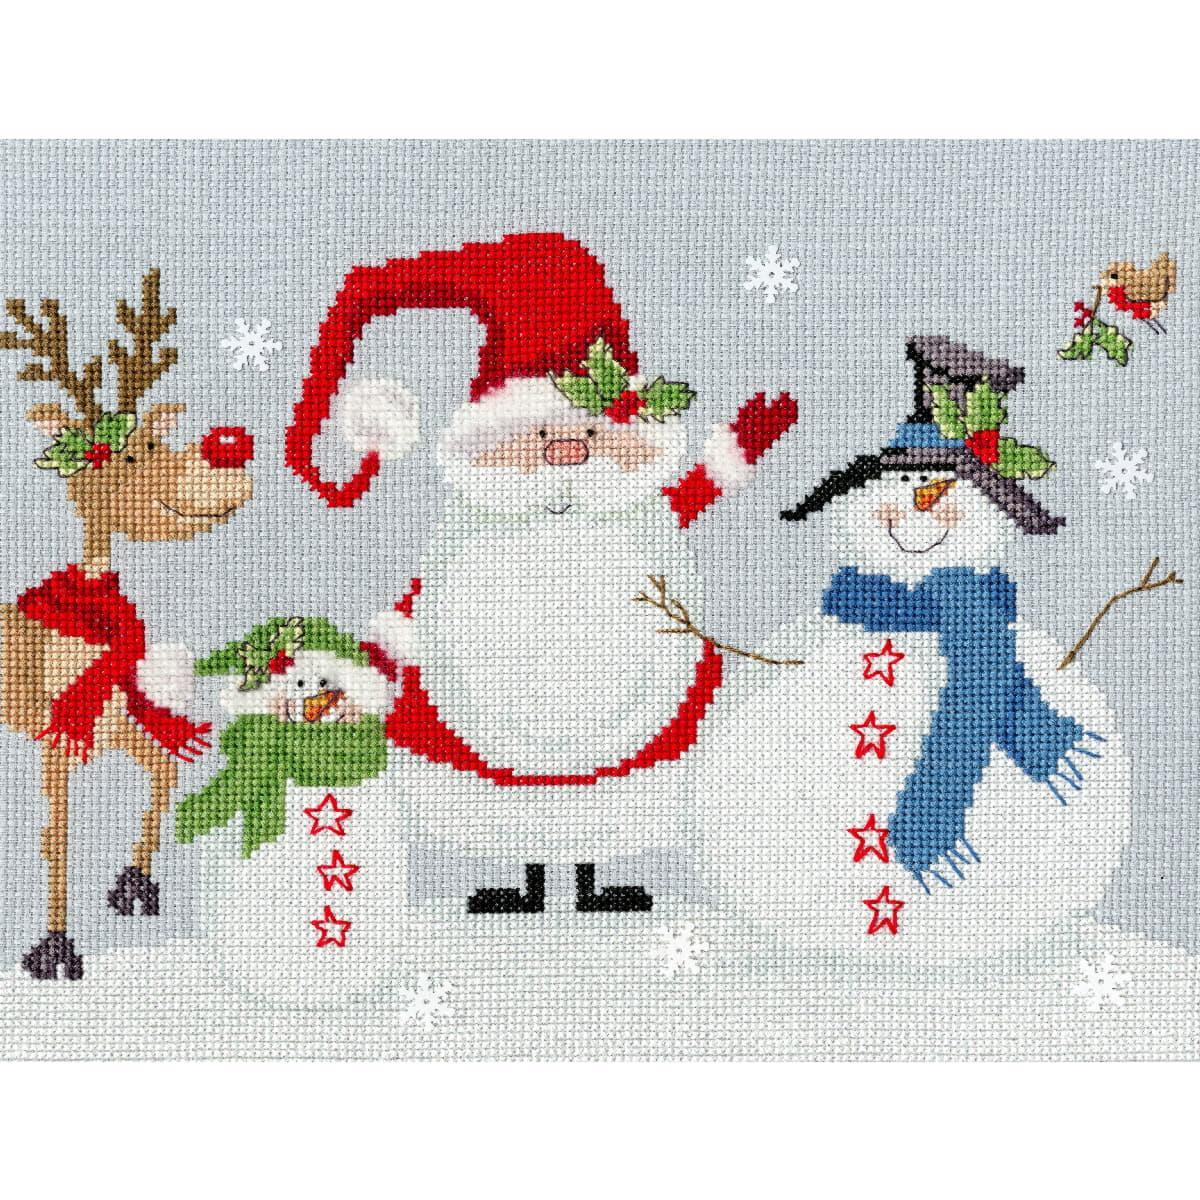 Bothy Threads counted cross stitch kit "Snowy...